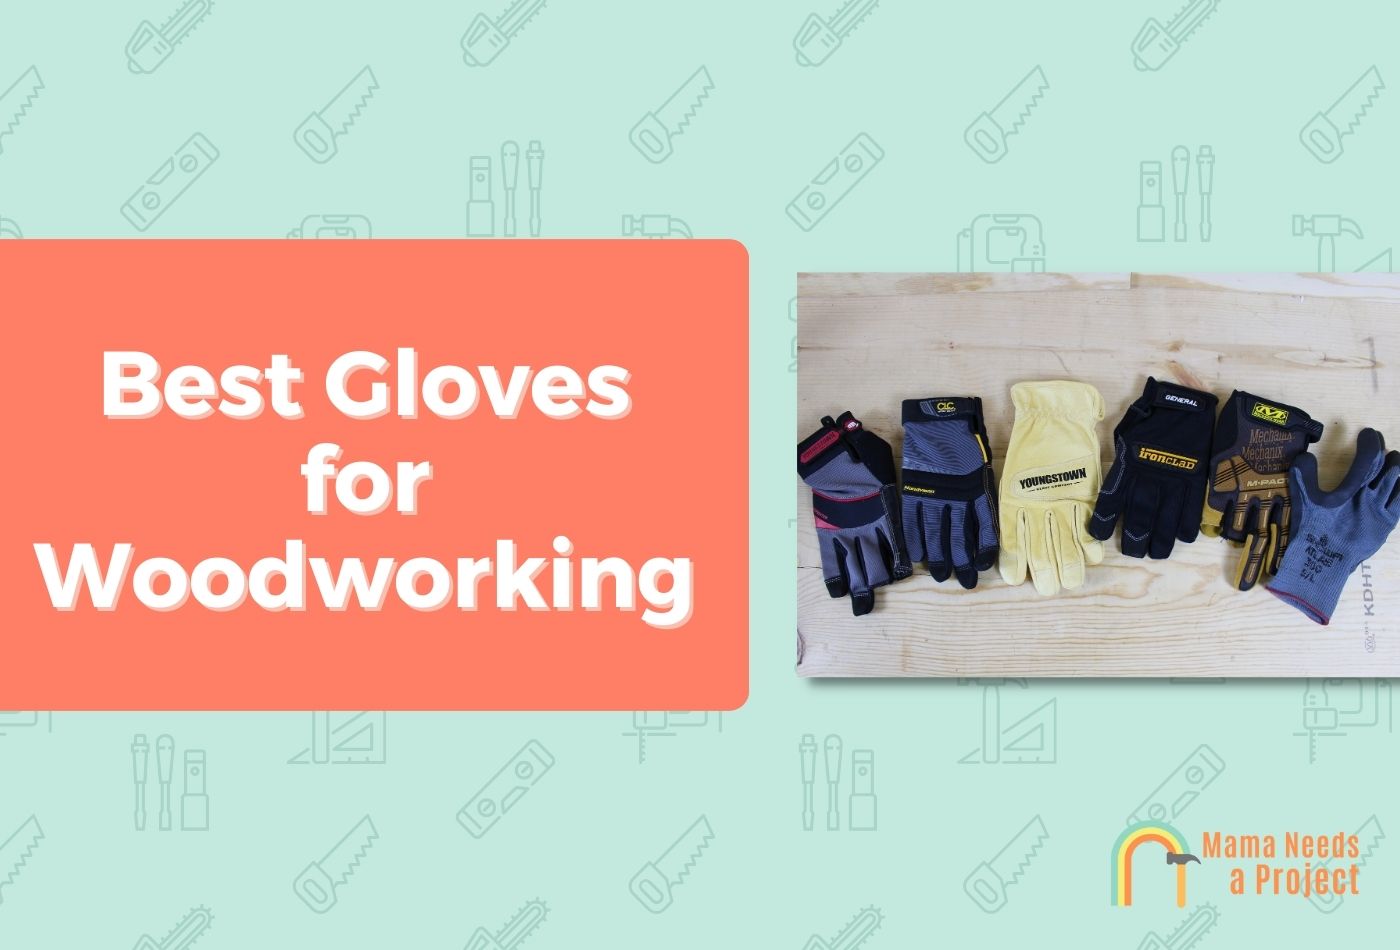 Best Gloves for Woodworking